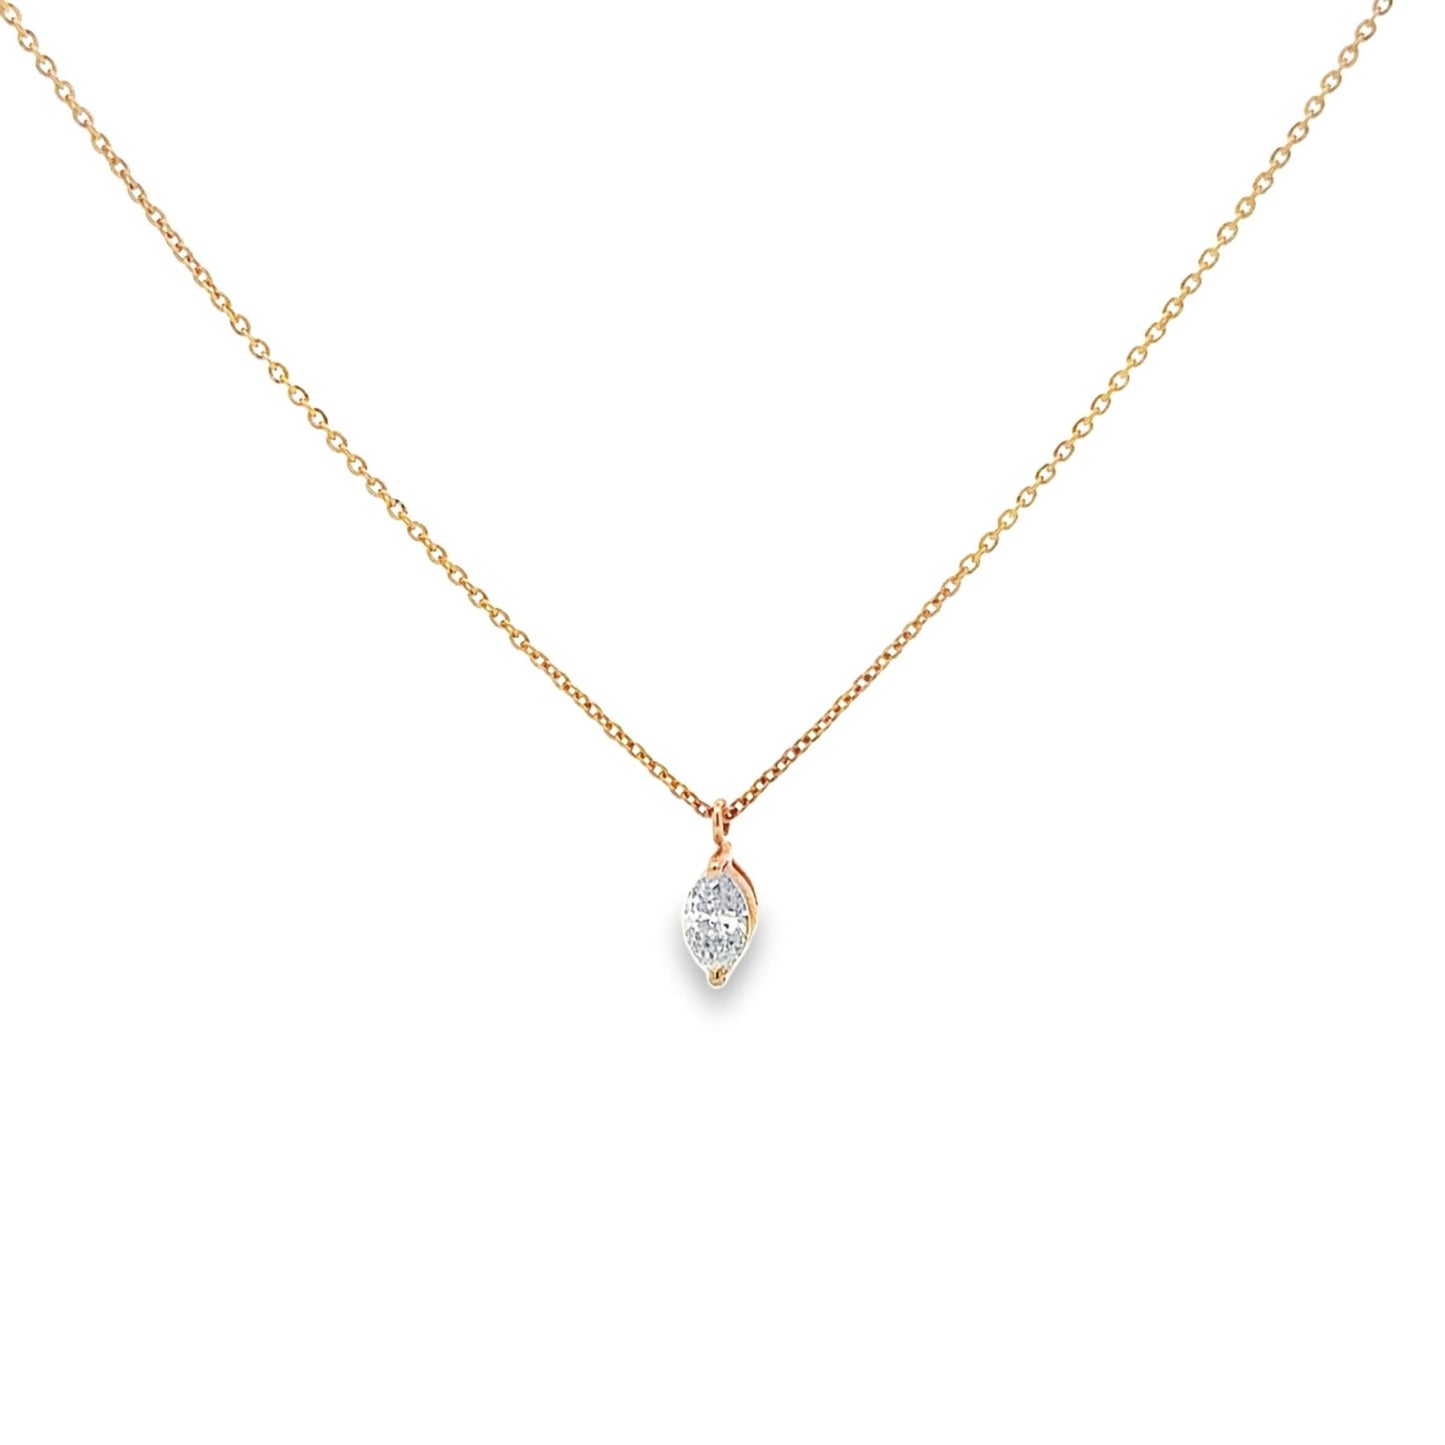 SPARKLING PEAR SHAPED DIAMOND NECKLACE